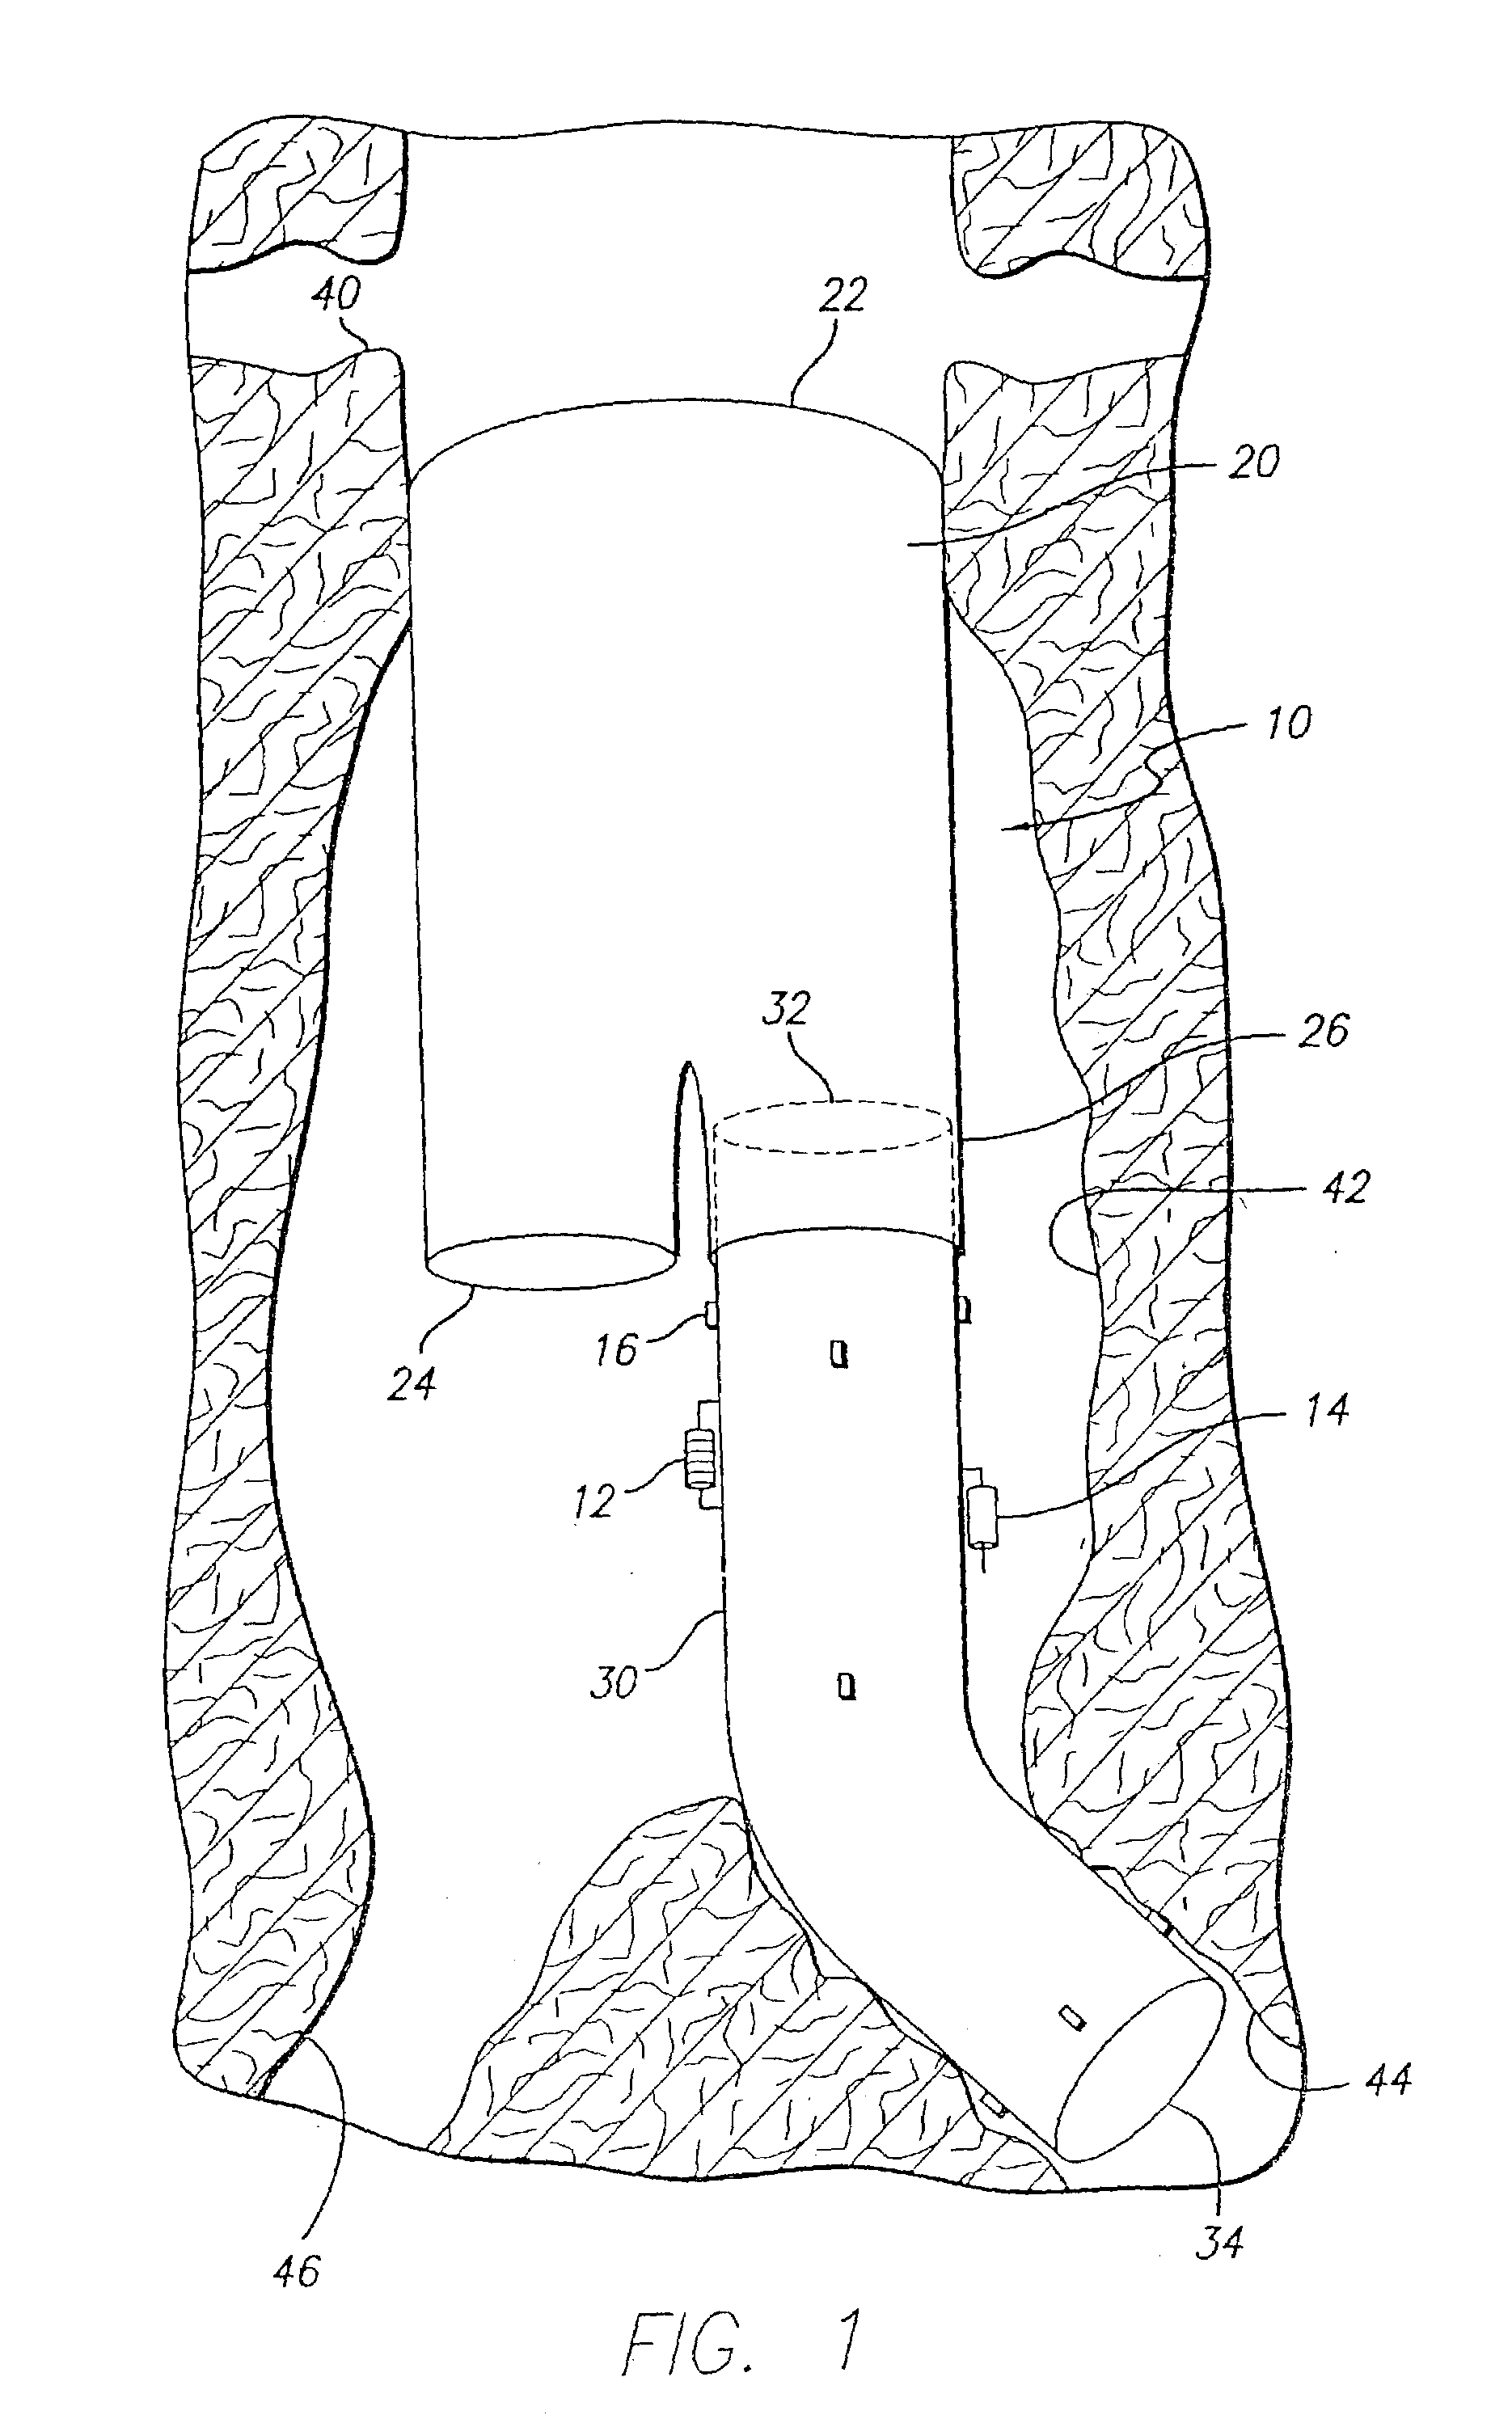 Endovascular graft with separable sensors